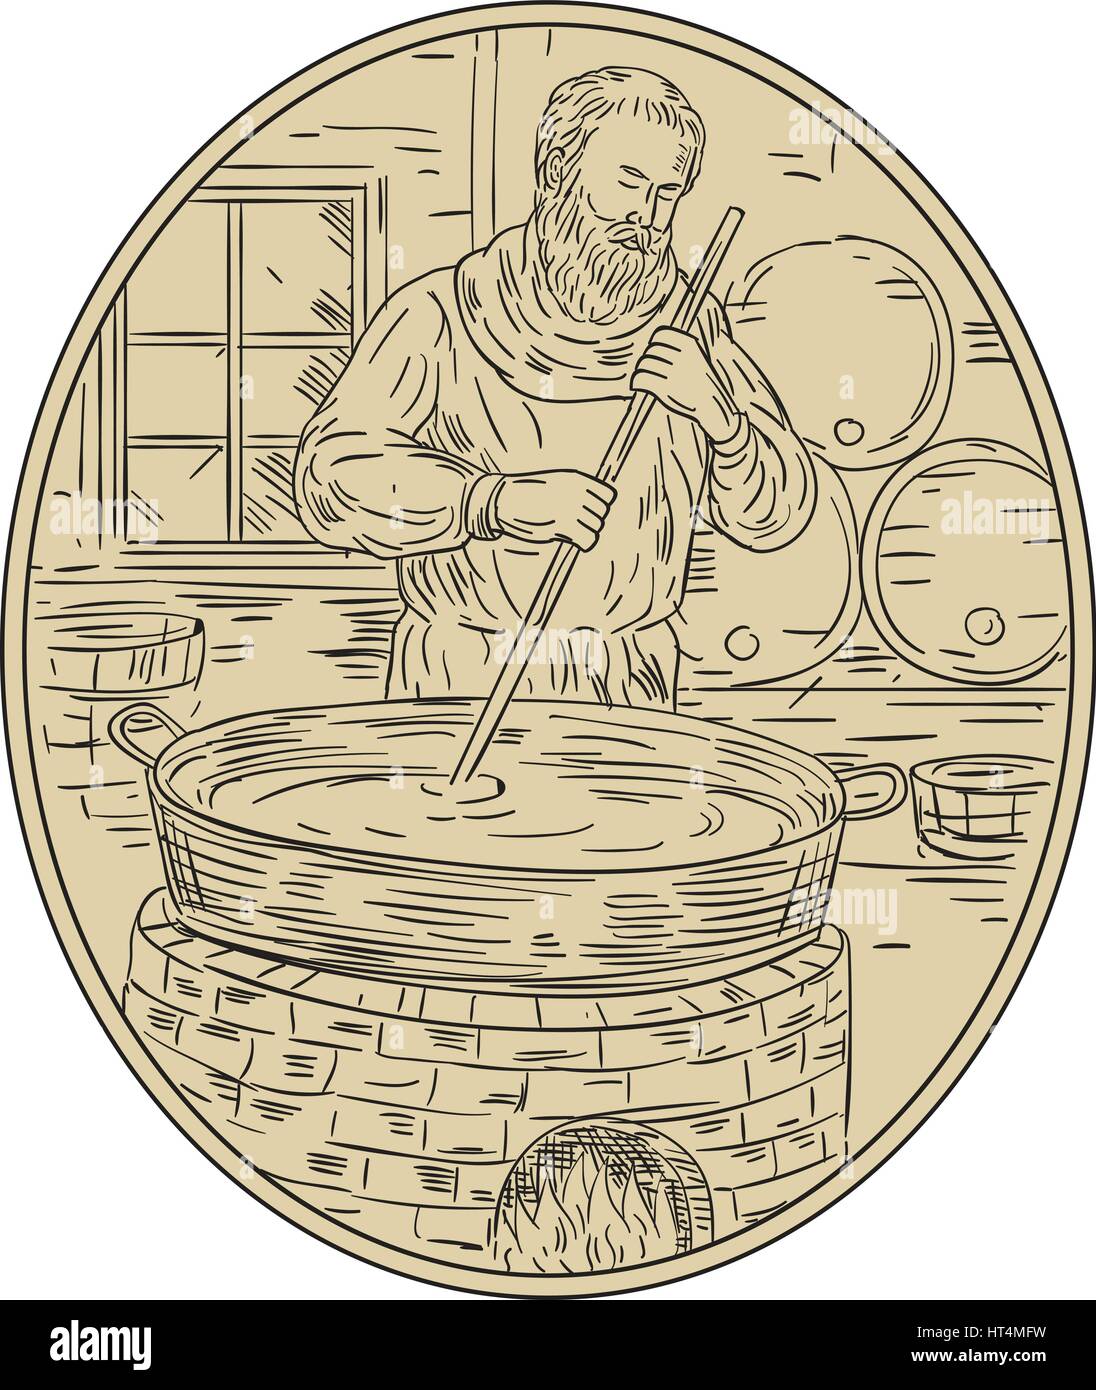 Drawing sketch style illustration of a medieval monk brewer brewing beer in brewery with barrel in background viewed from front set inside oval shape. Stock Vector